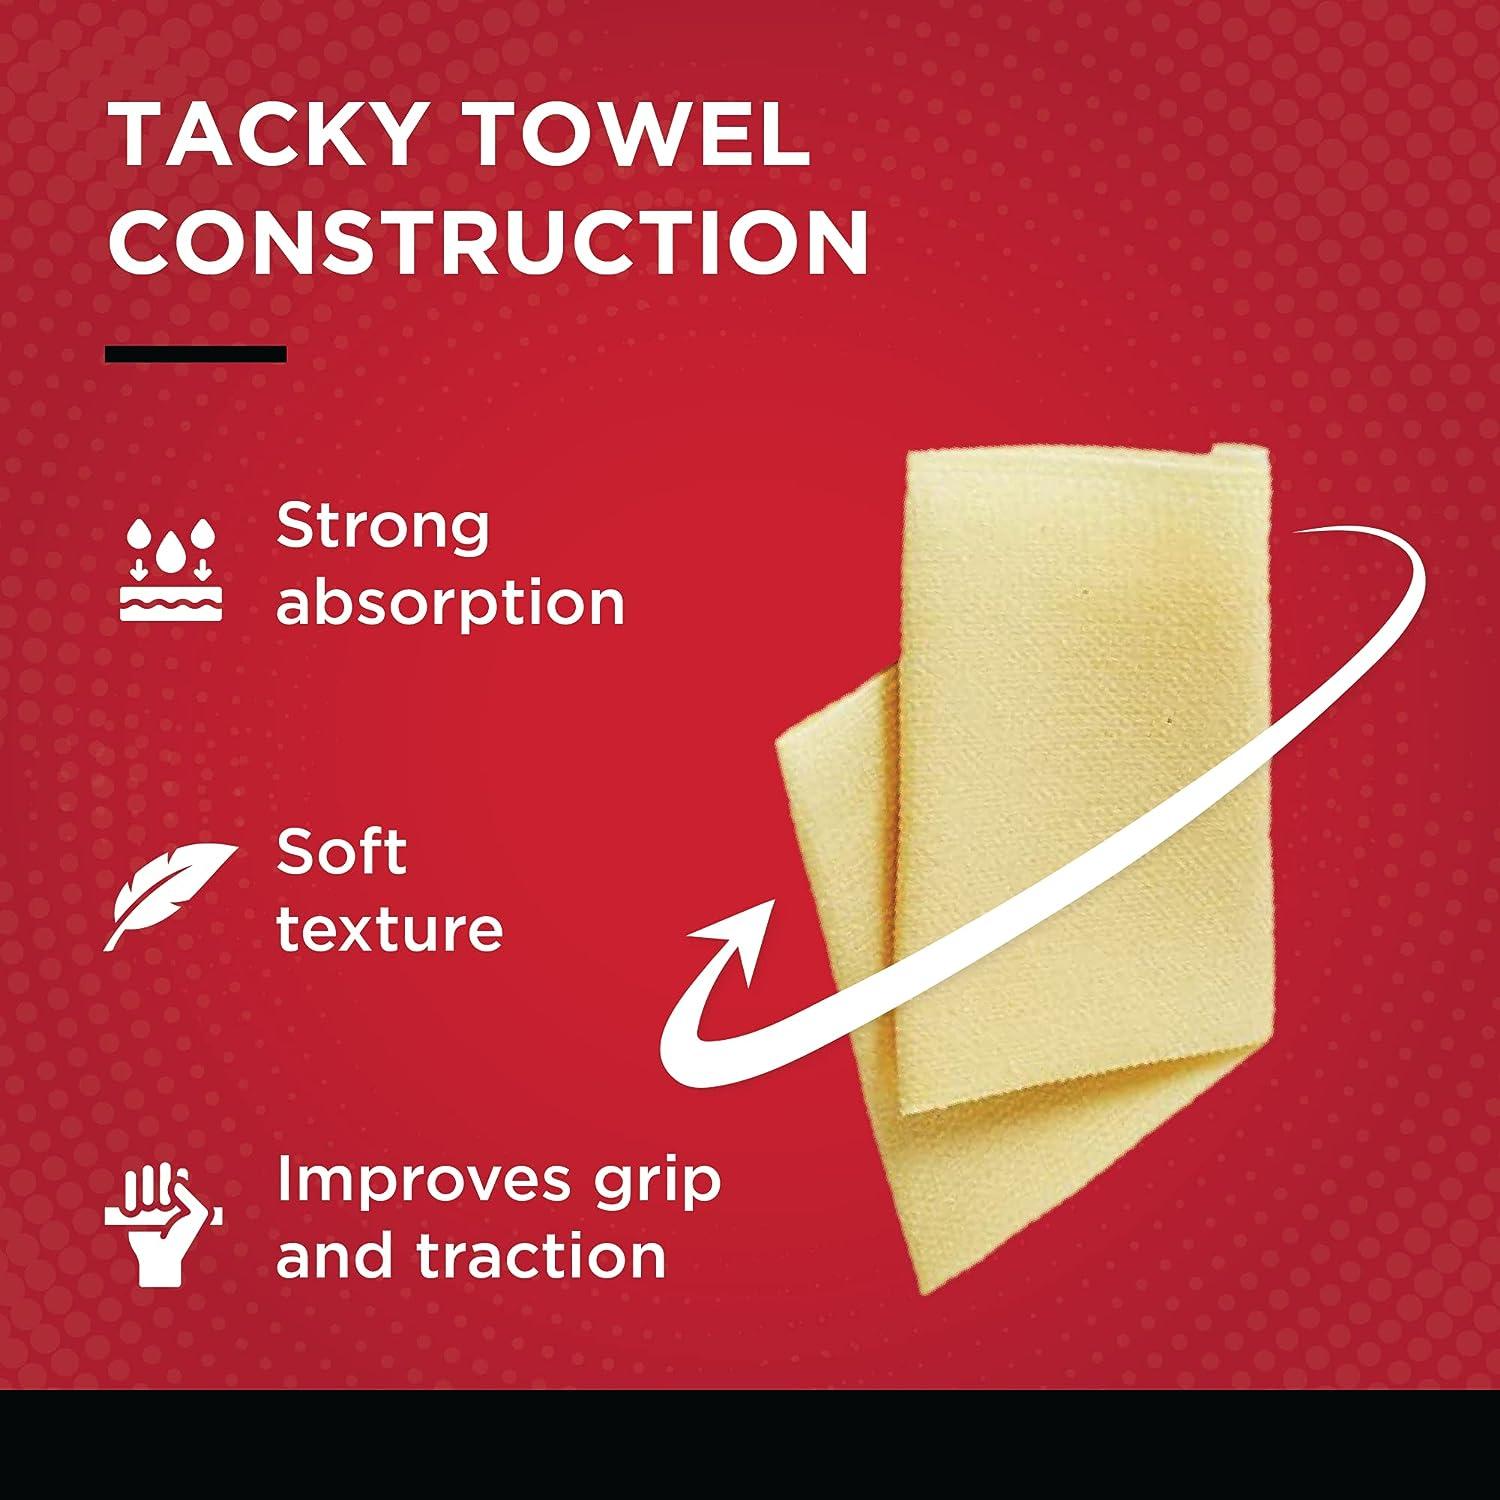 hapheal Tacky Towel Grip Enhancer Perfect for Golf-Clean-Won't Stain Reples  Moisture-Dissipates Quickly